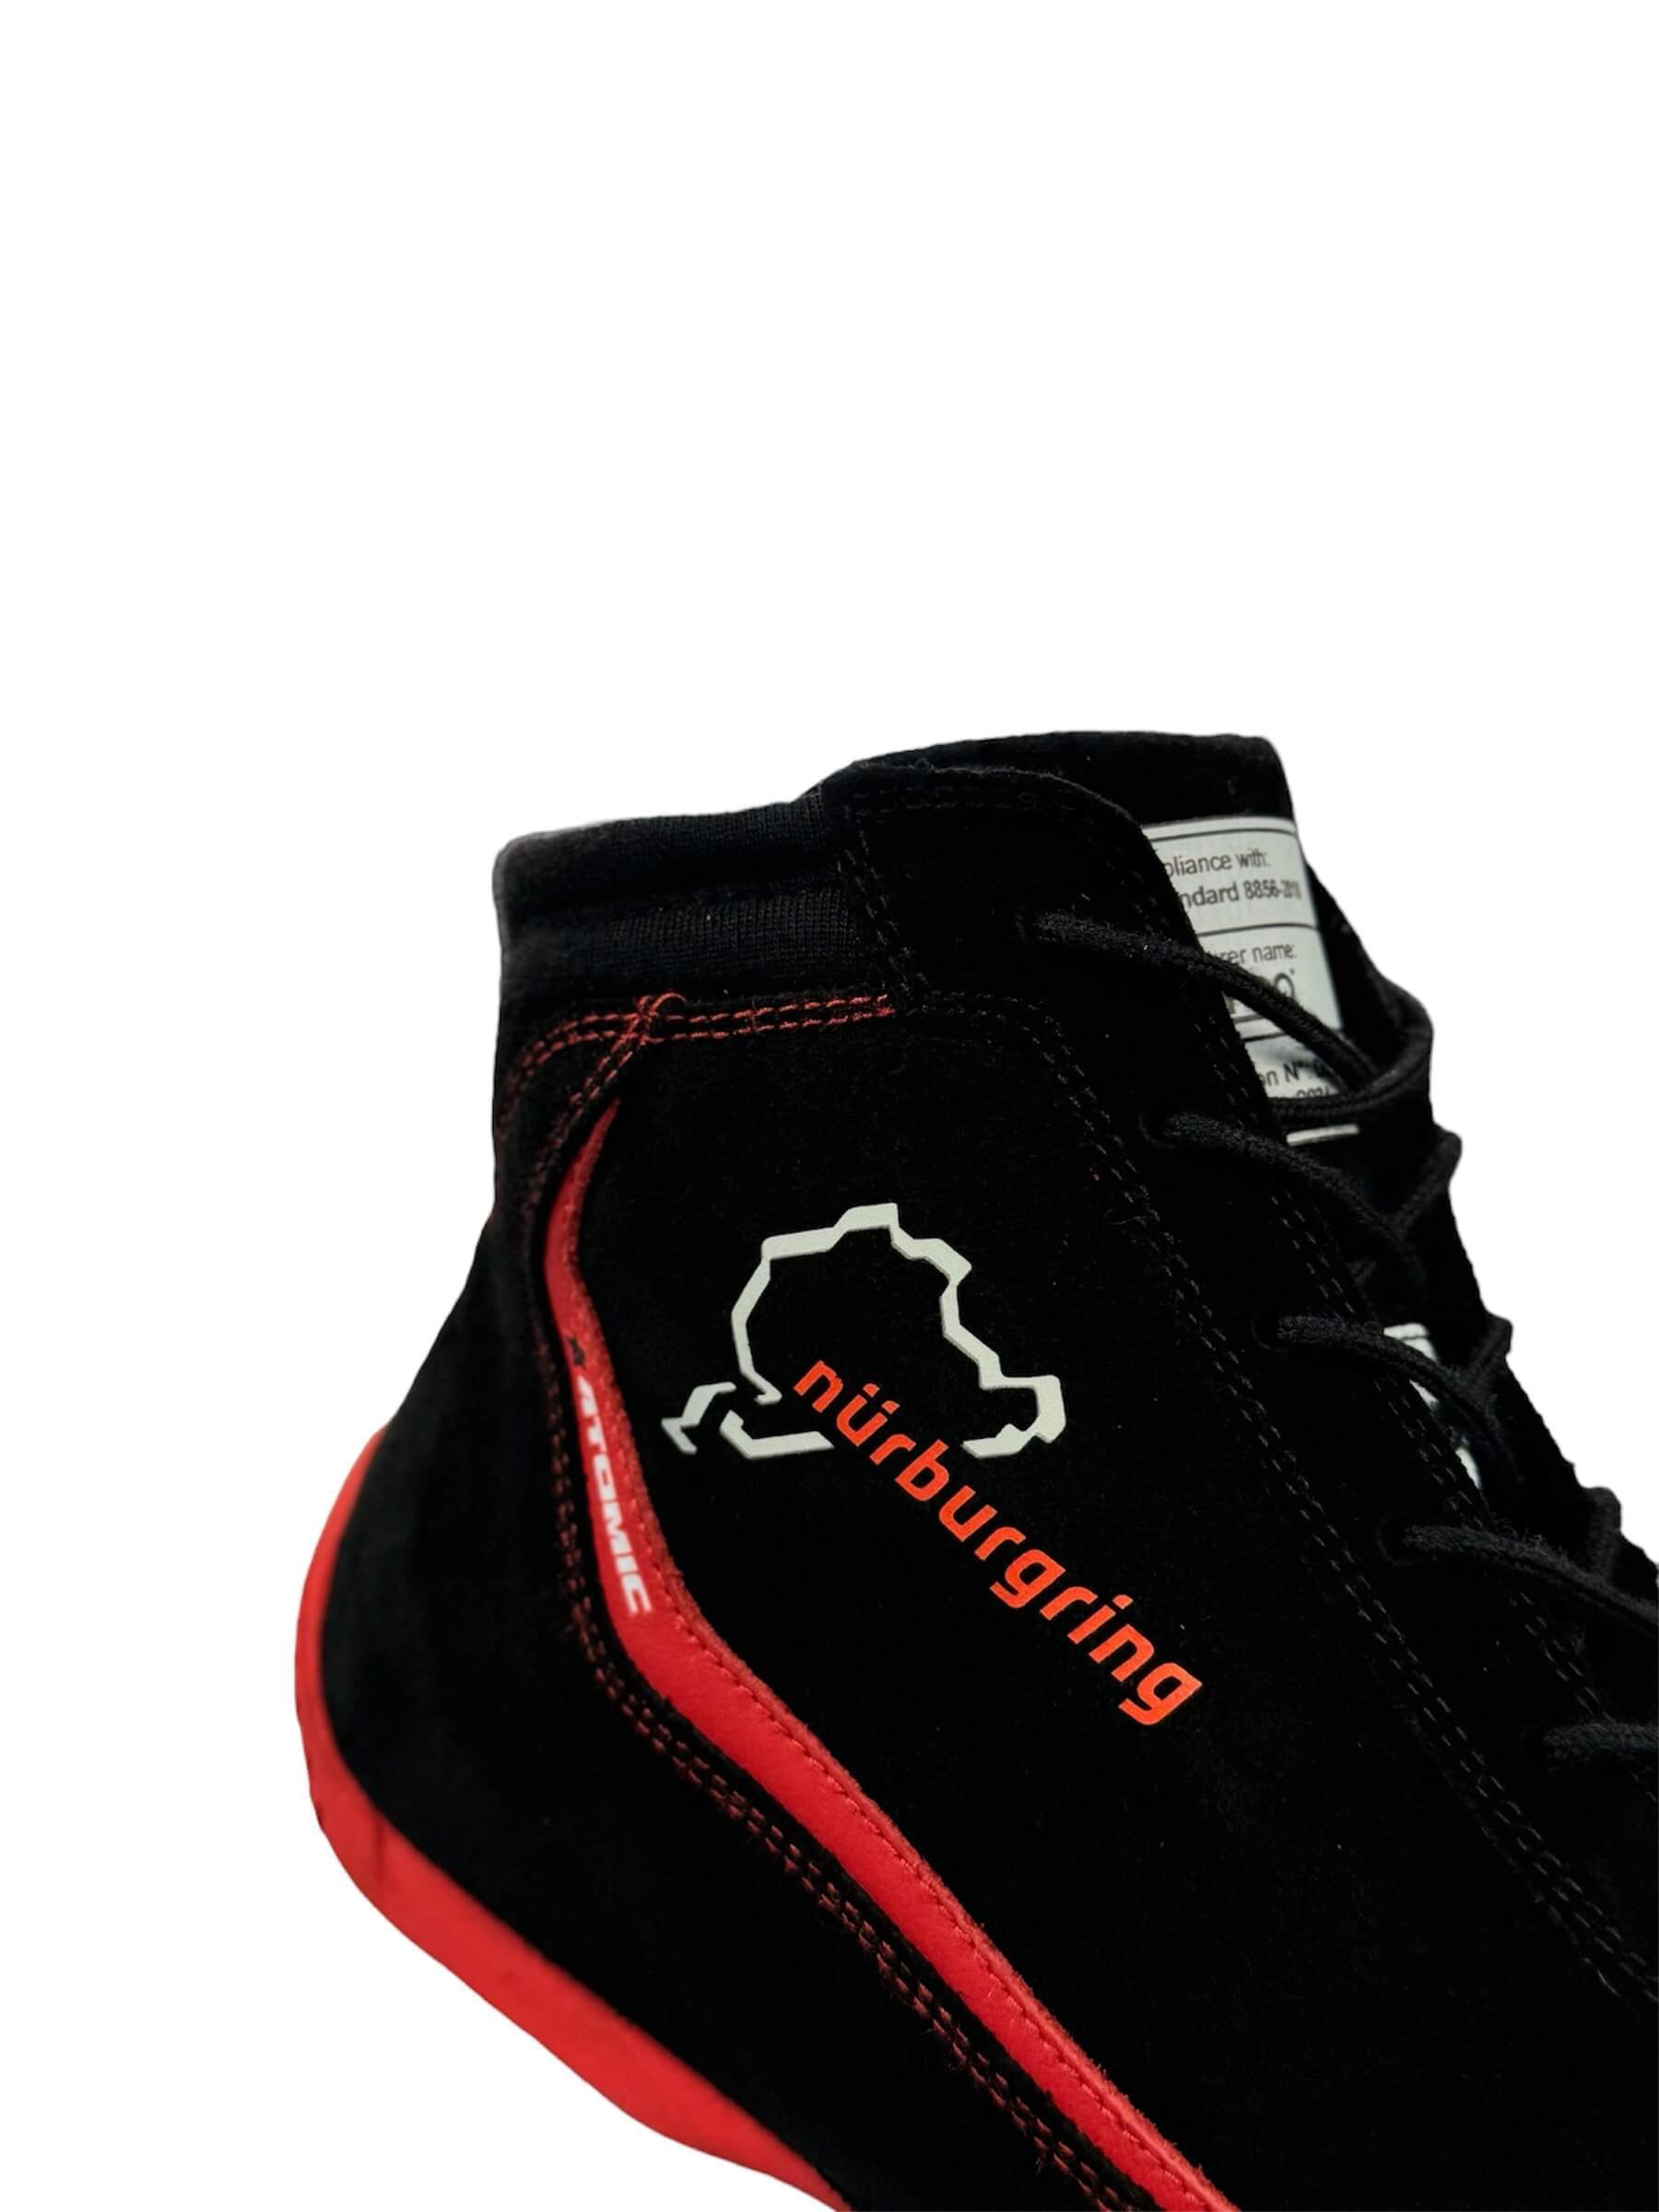 SPARCO 001295SP_NBR44 Shoes Slalom Nurburgring Edition black/red Size 44 Photo-4 